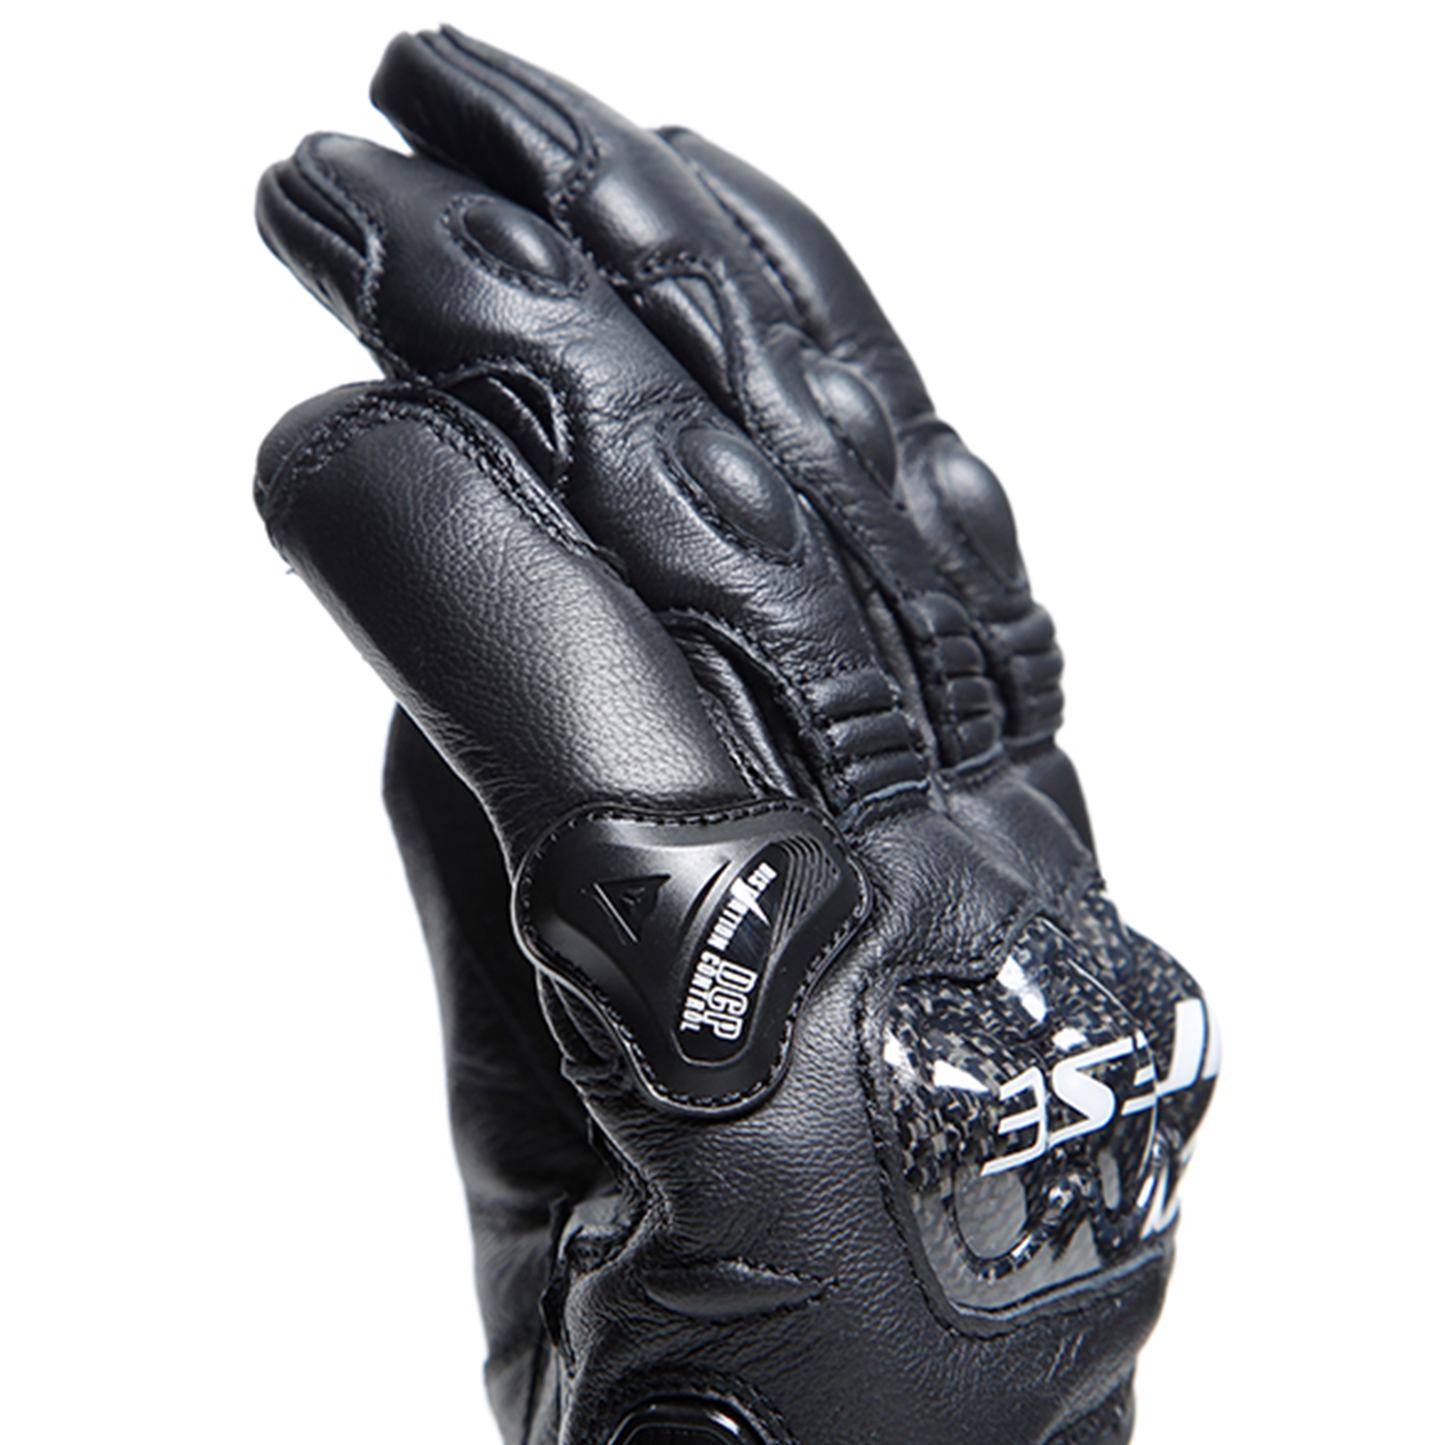 Dainese Carbon 4 Long Leather Gloves - Black